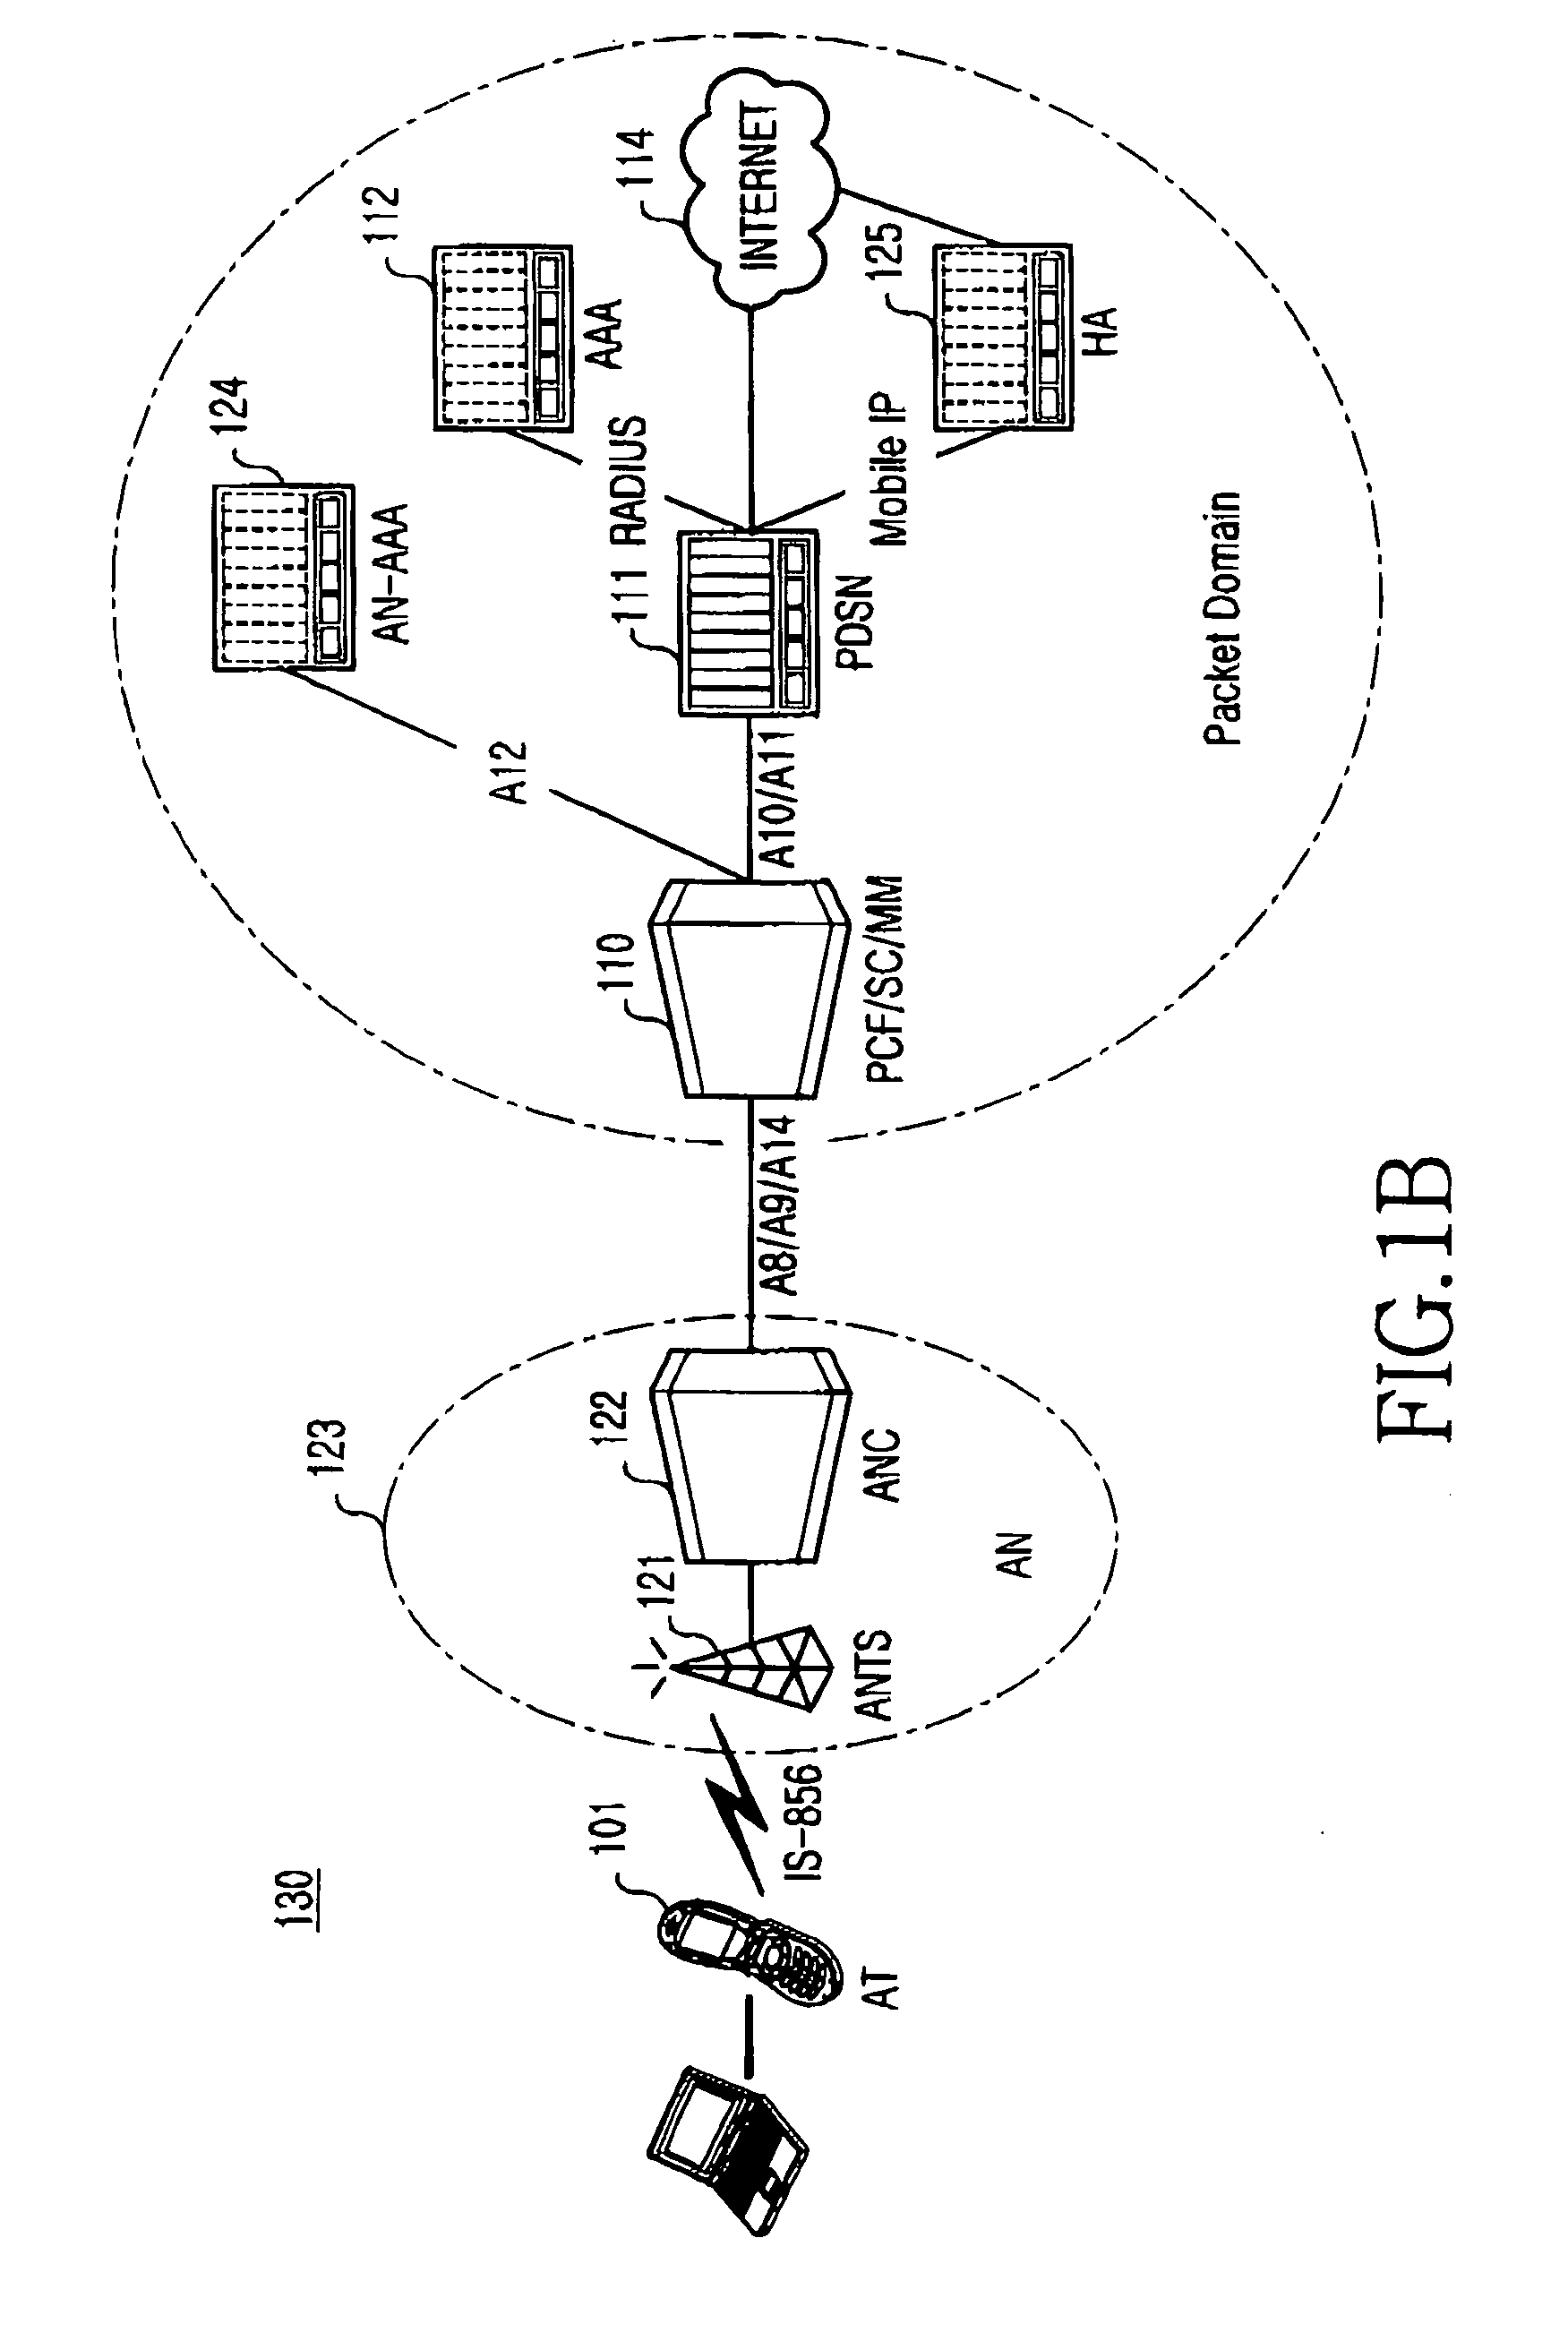 System and method for performing an inter-system handoff between a high rate packet data mobile network and a voice mobile network